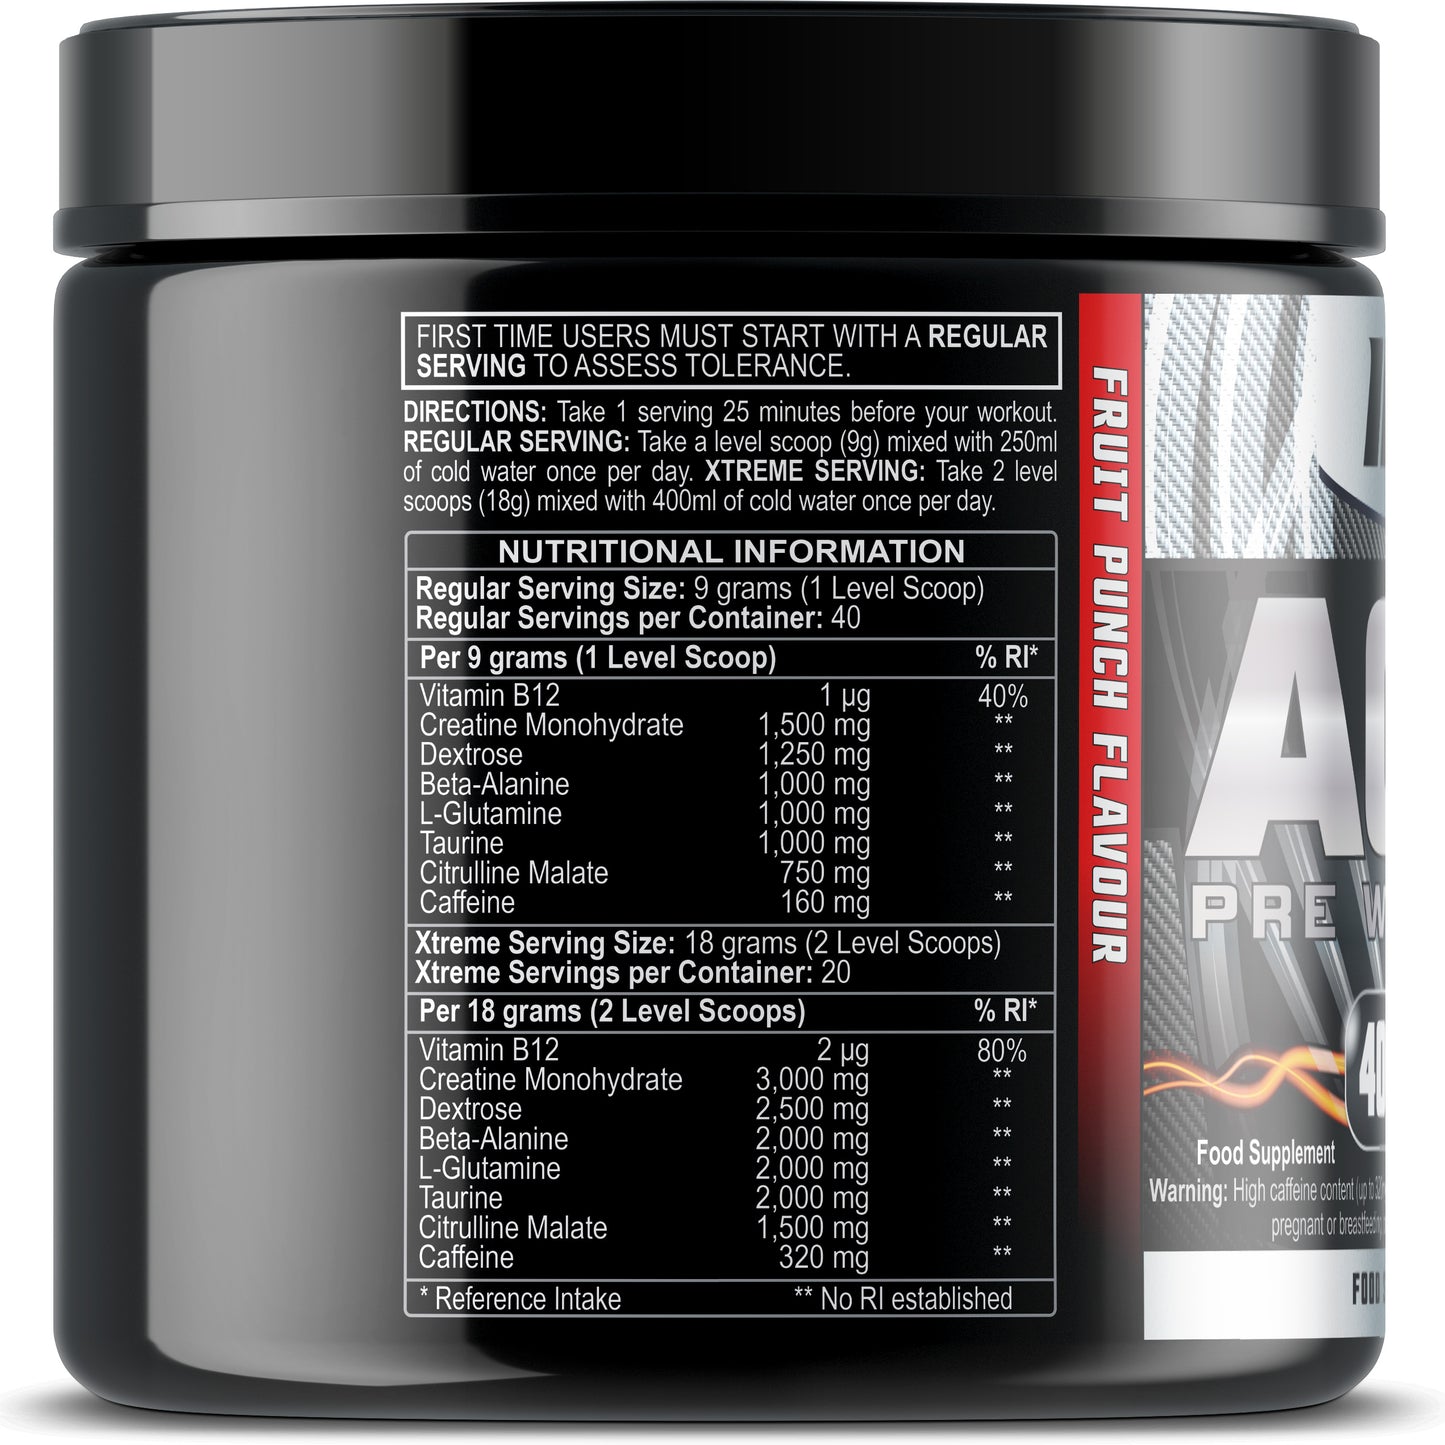 AC8 Pre Workout - Fruit Punch